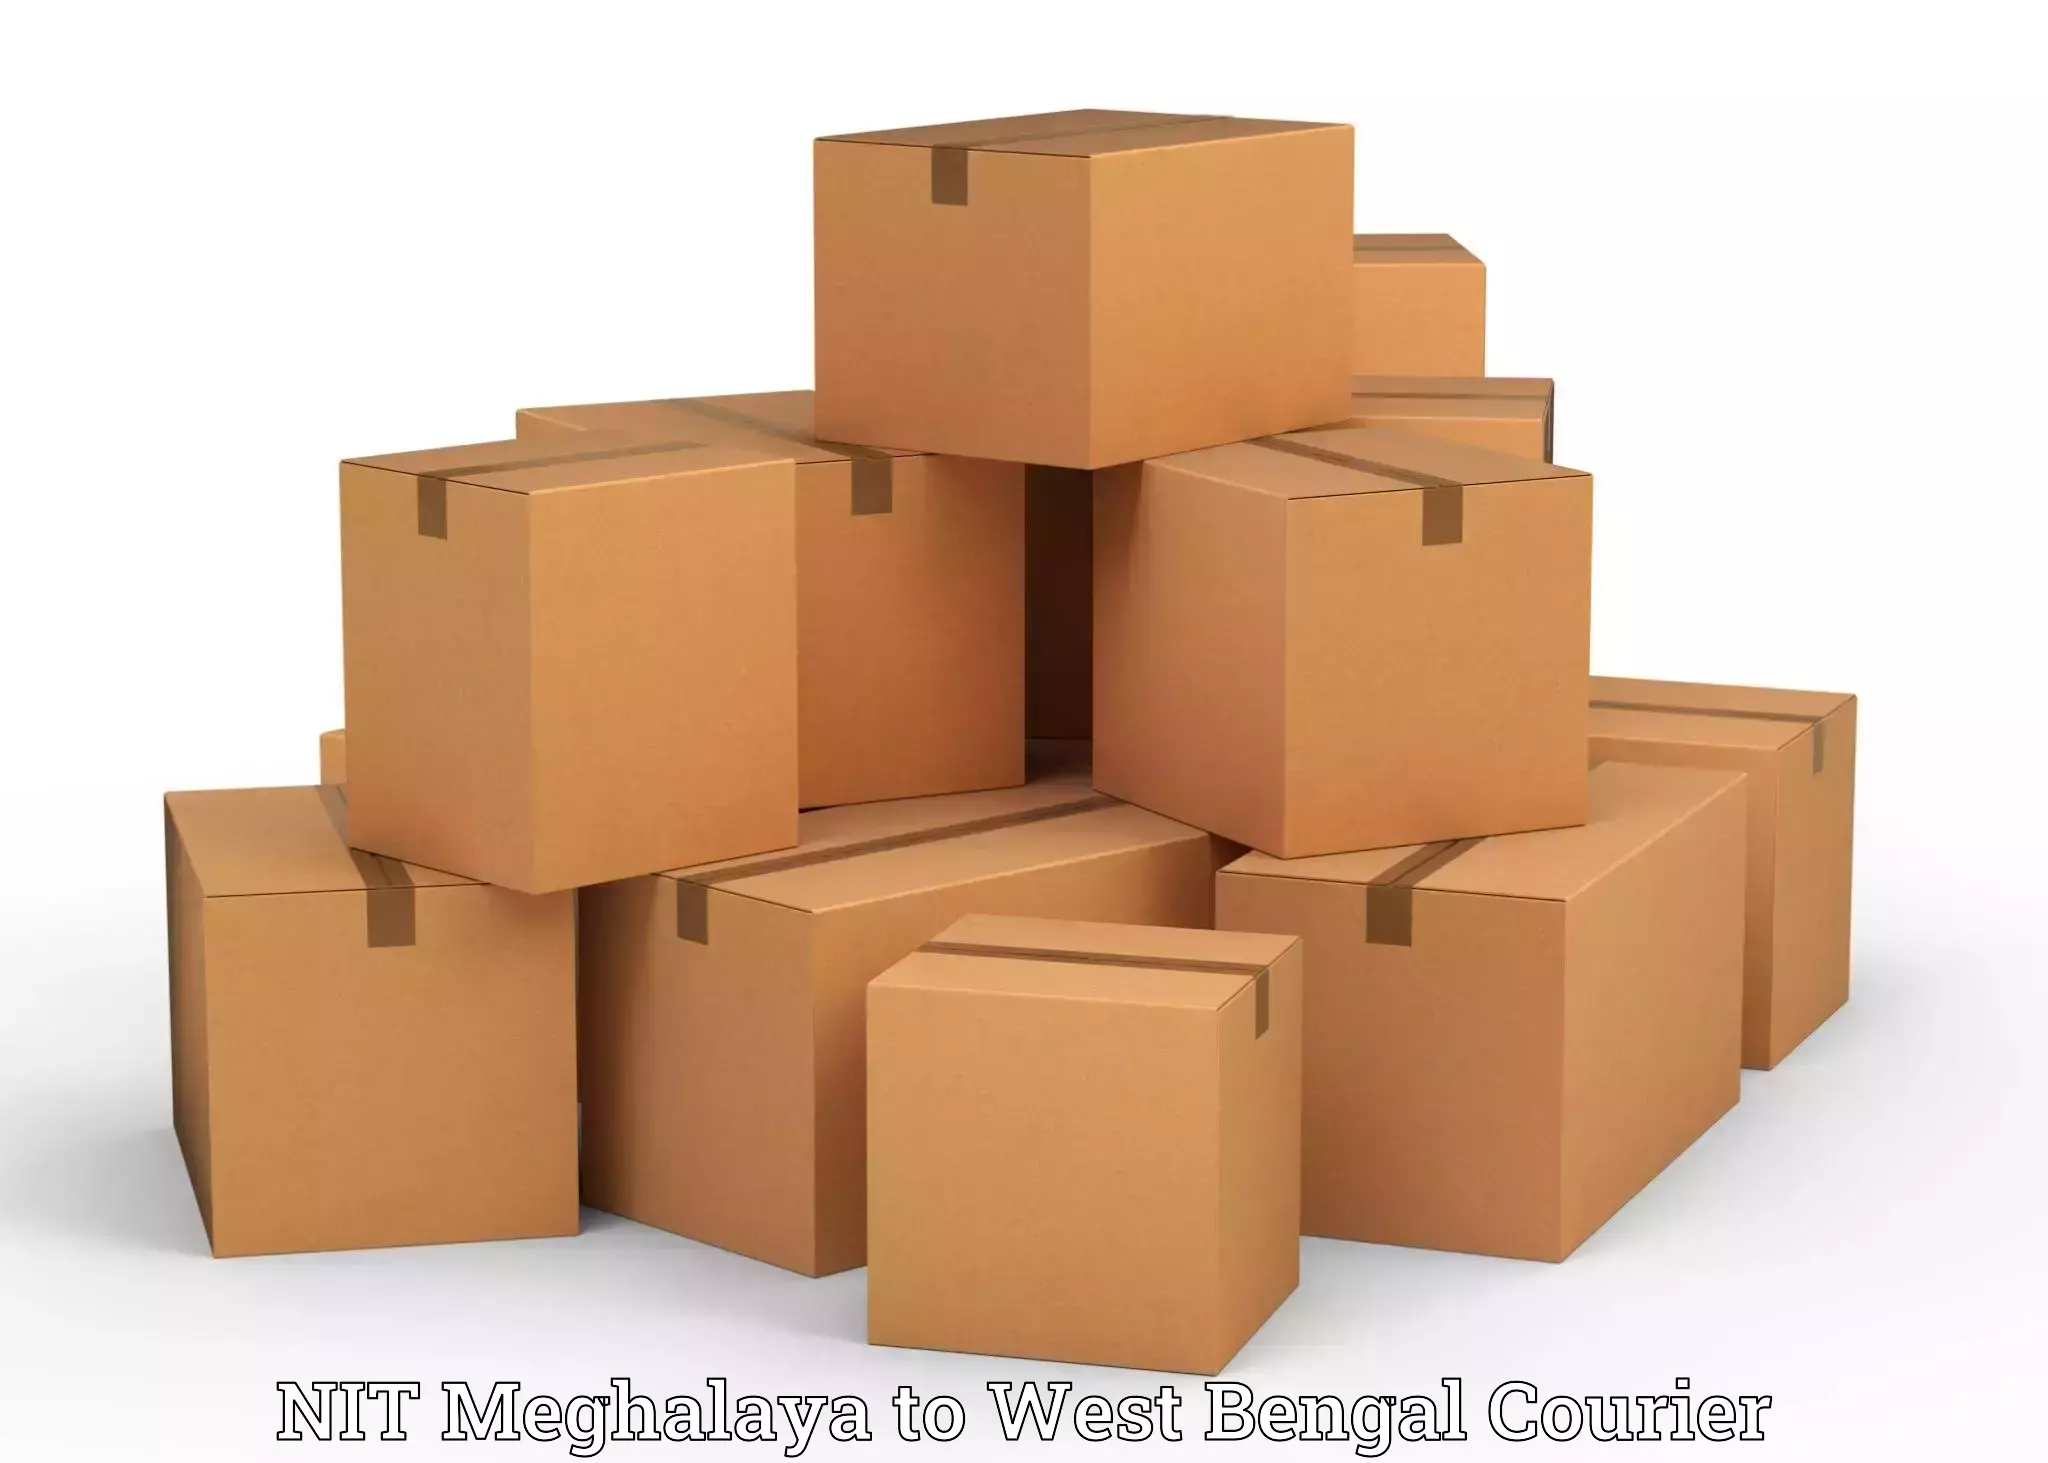 Quality relocation assistance NIT Meghalaya to West Bengal